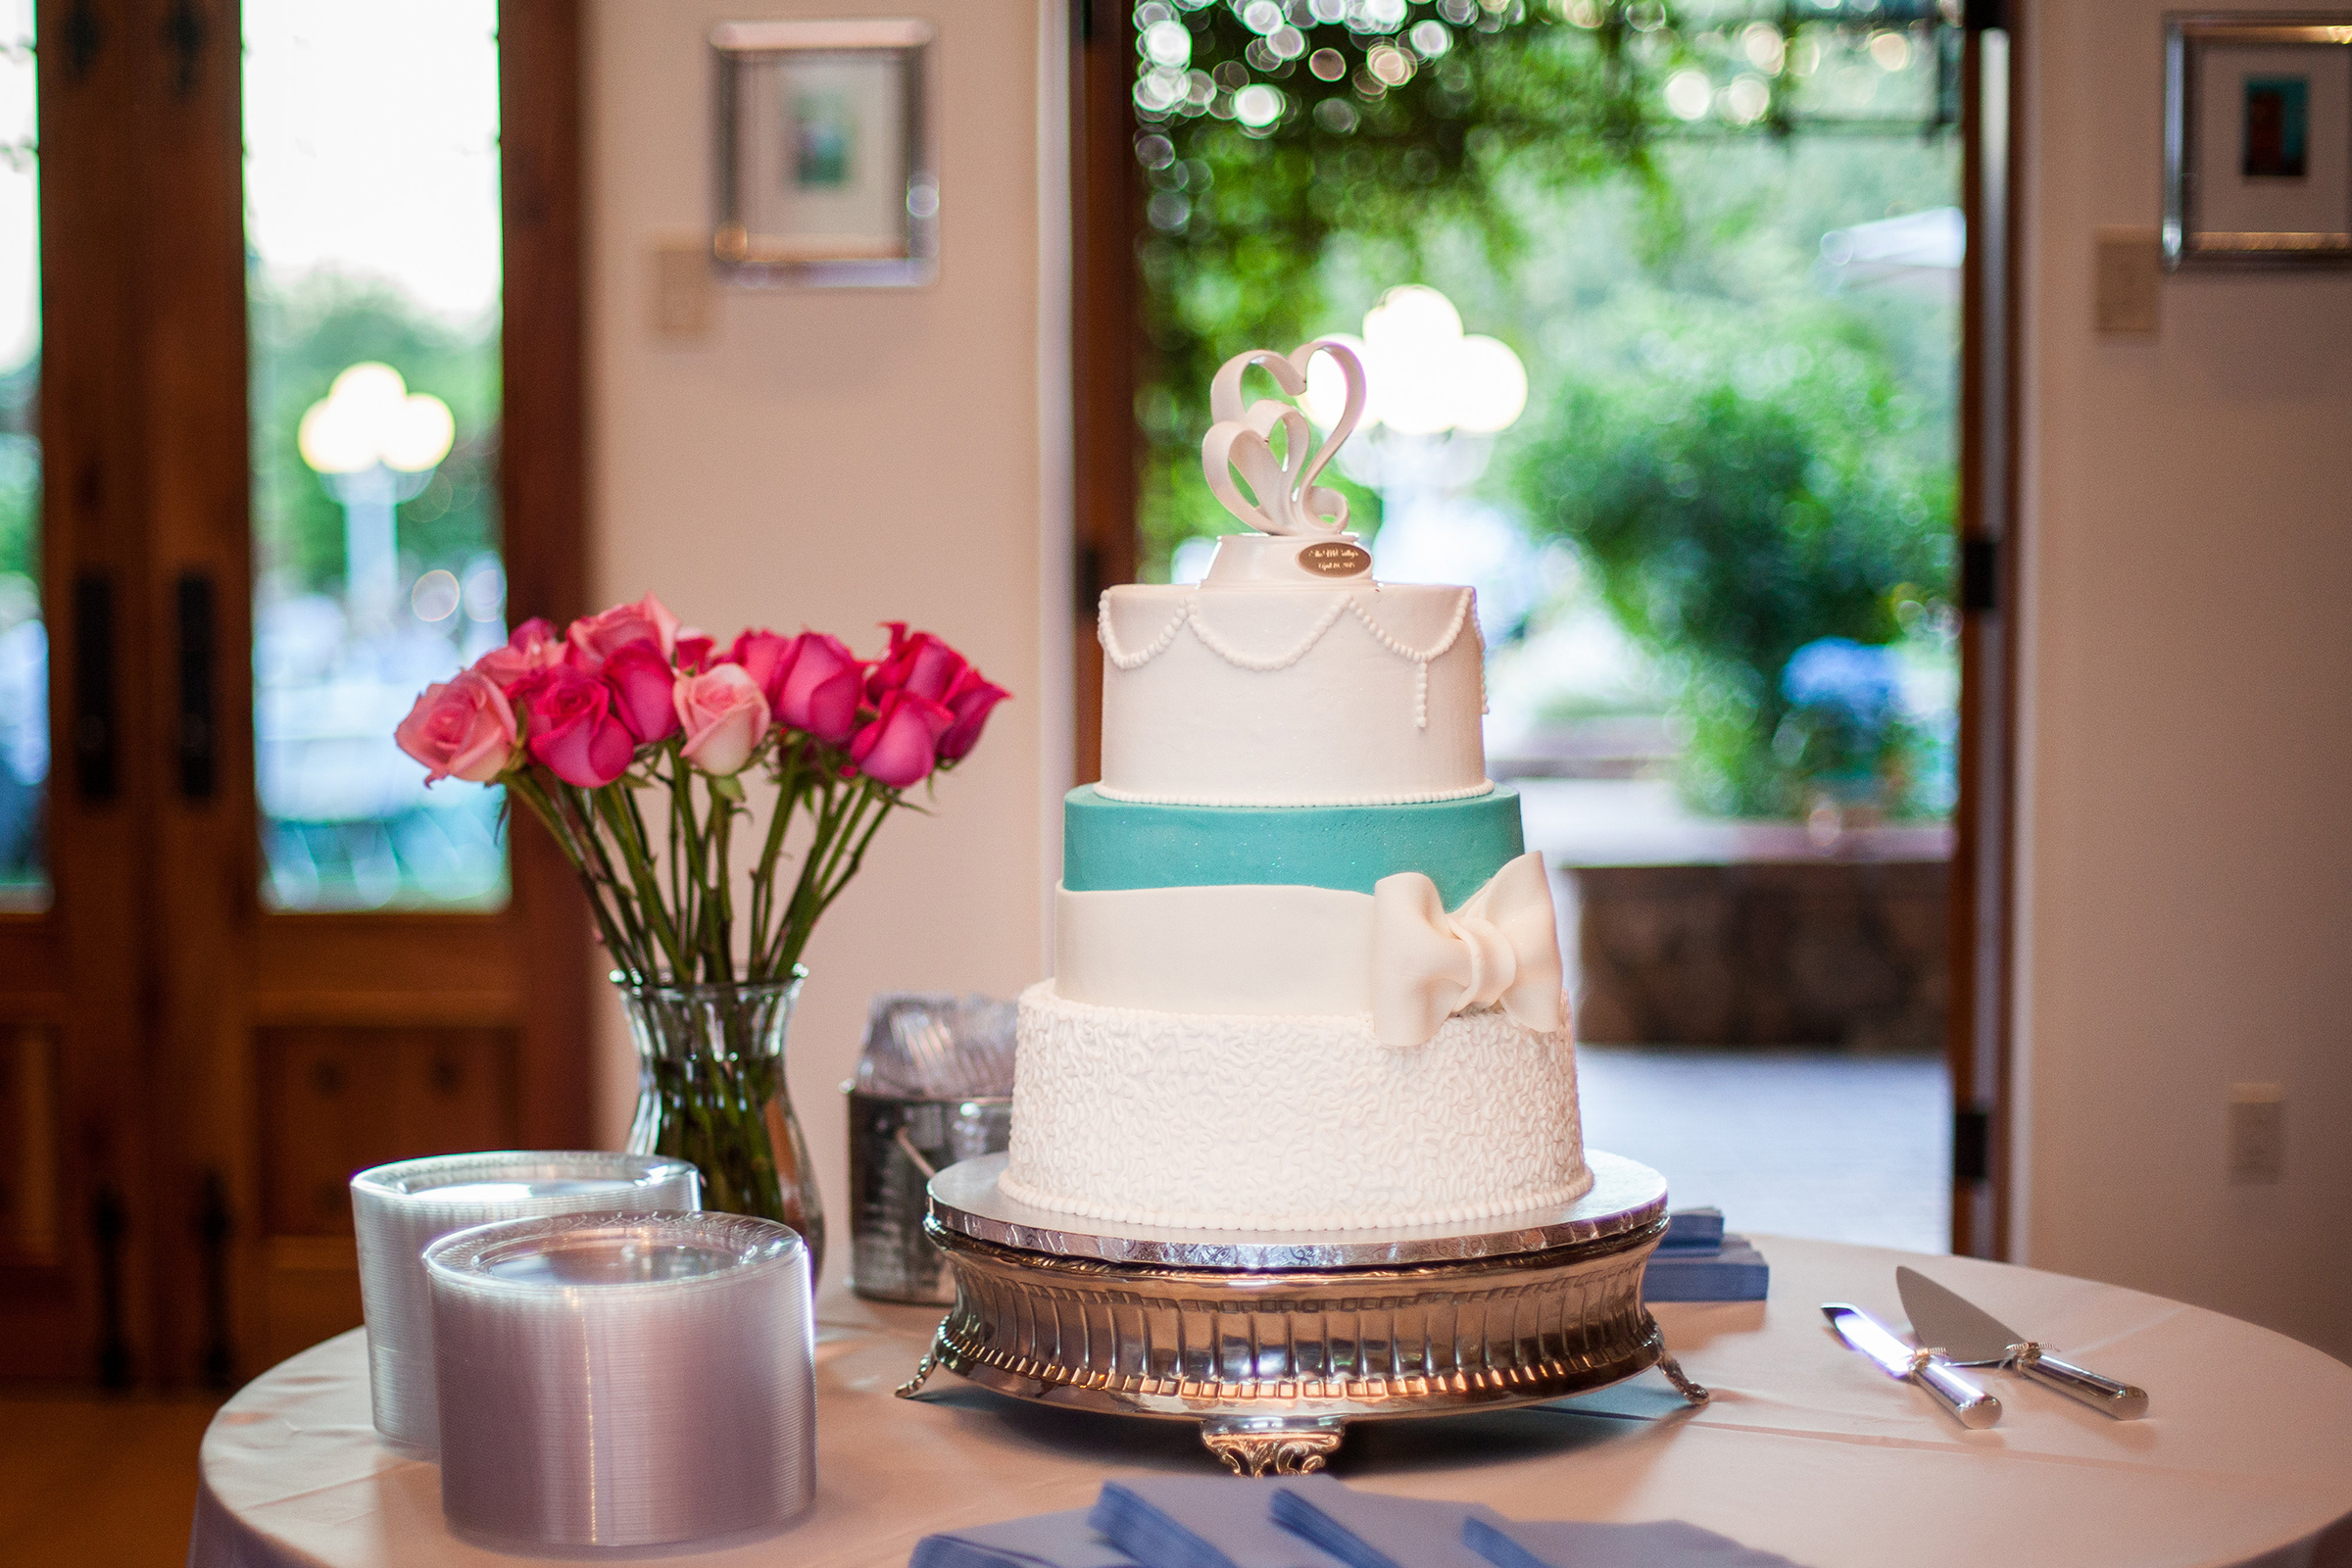 white and turquoise 3 tier wedding cake